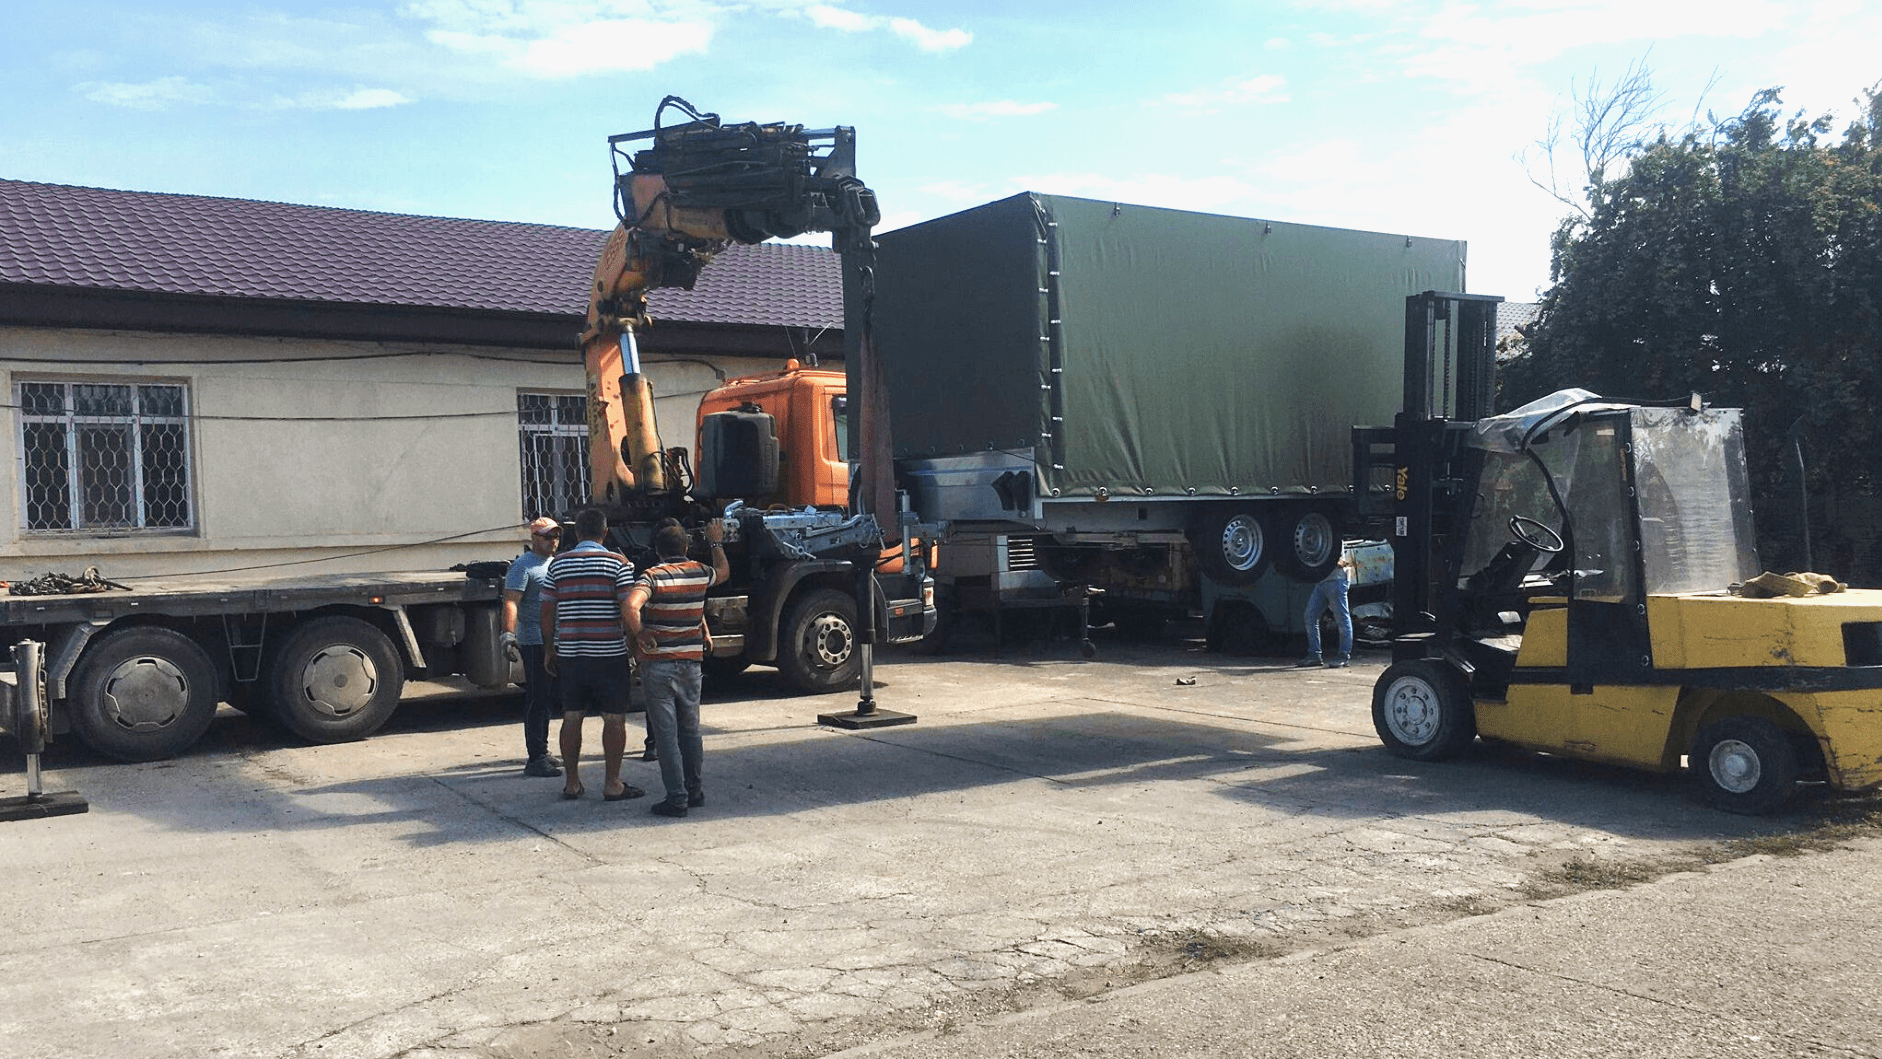 Trailer unloading project using a crane truck and a forklift